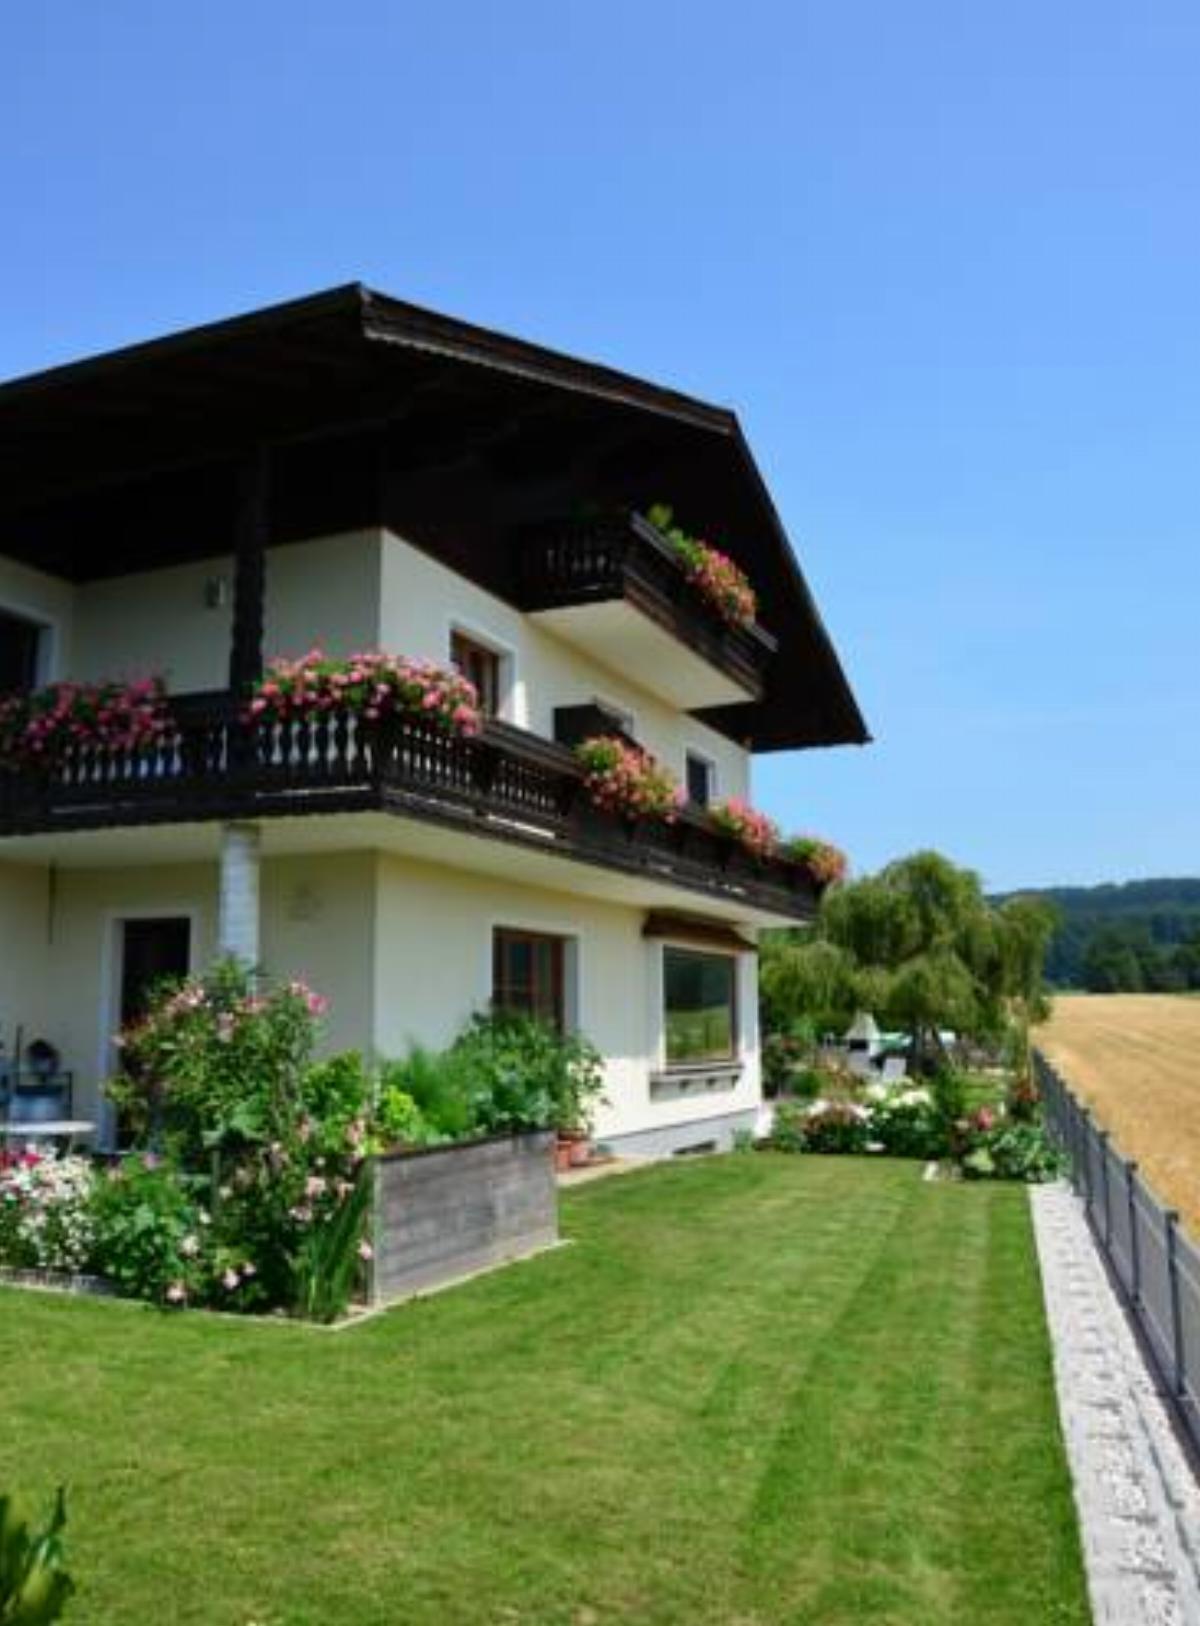 Haus Gruber Hotel Attersee am Attersee Austria